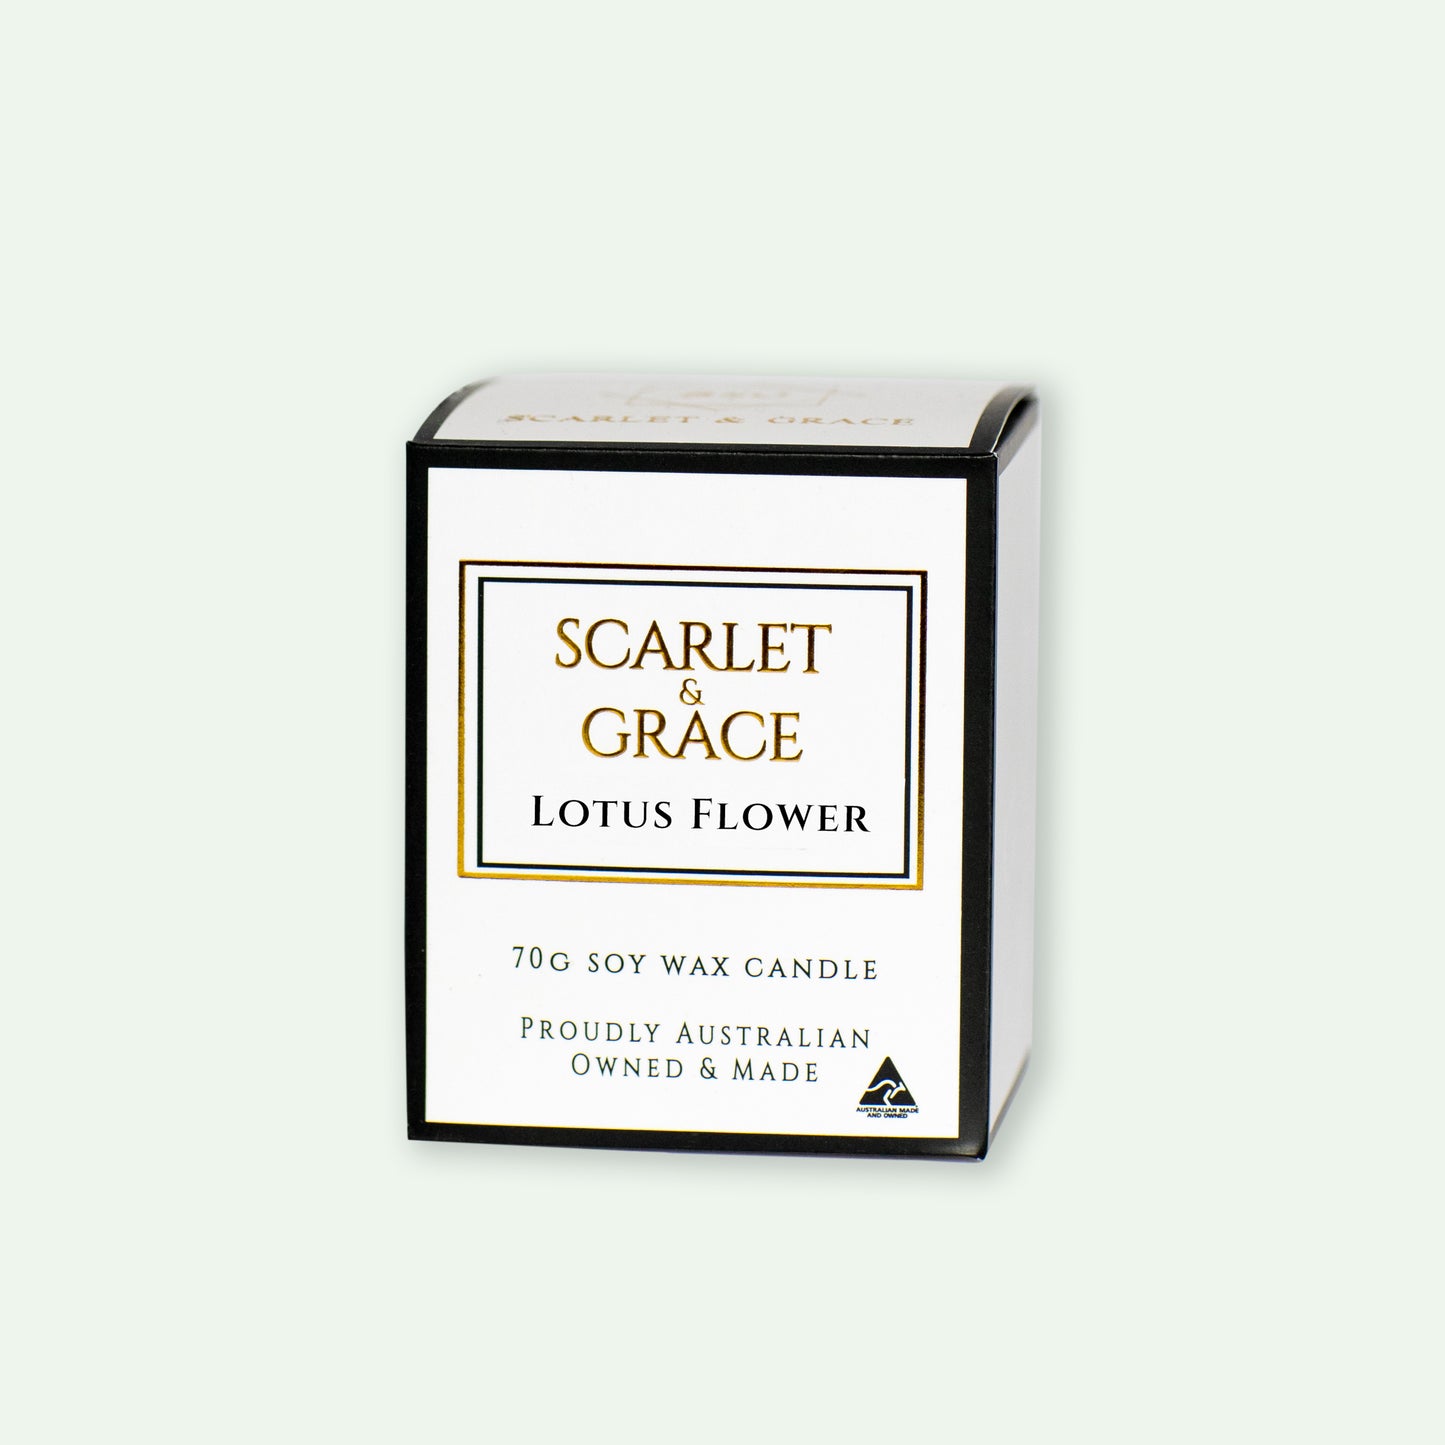 Lotus Flower - 70gm Soy Wax Candle - Scarlet & Grace